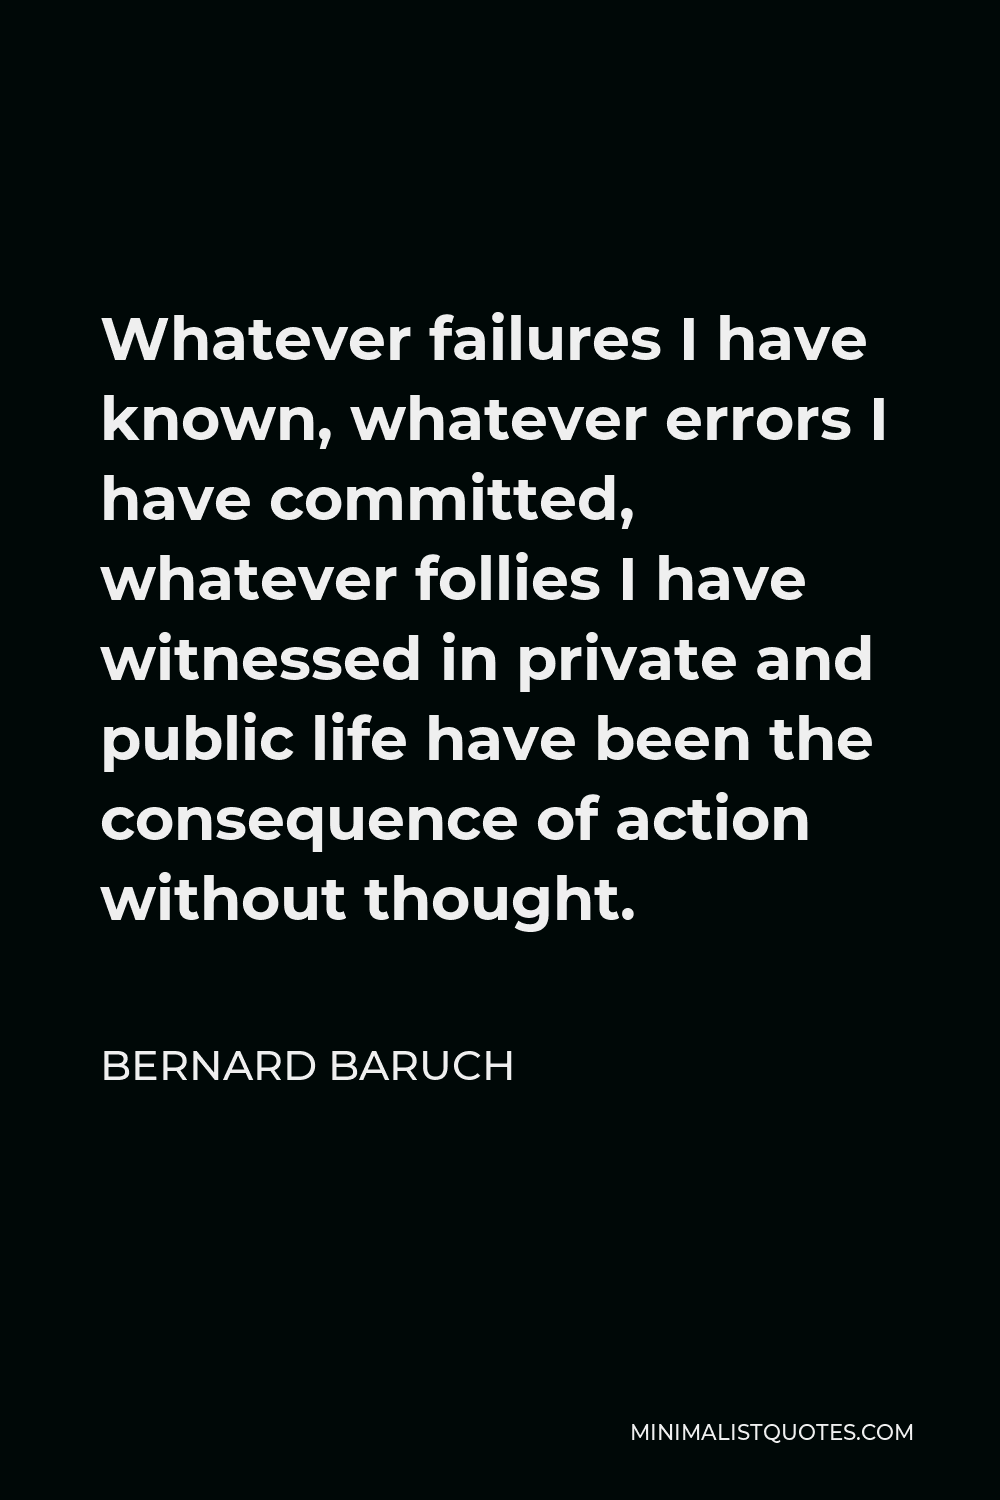 Bernard Baruch Quote - Whatever failures I have known, whatever errors I have committed, whatever follies I have witnessed in private and public life have been the consequence of action without thought.